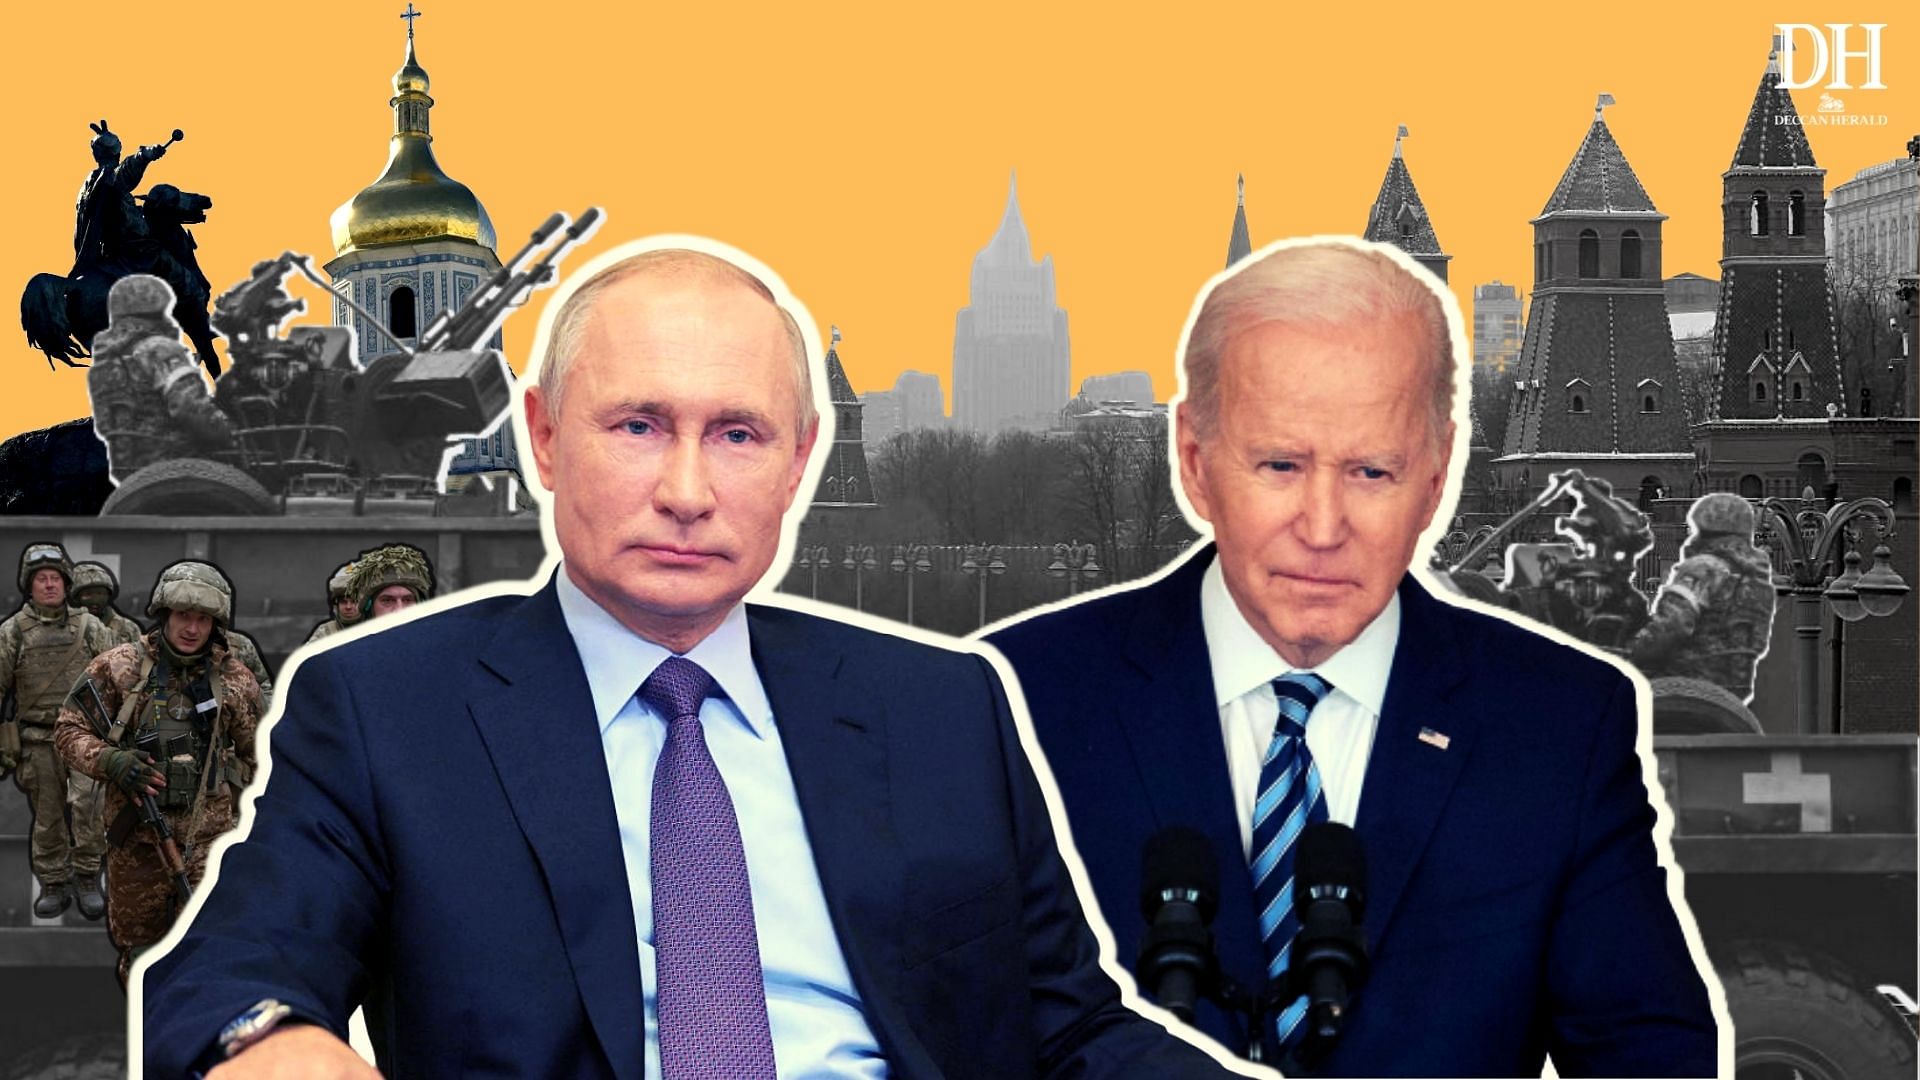 Asked about the impact that Putin's decision to invade Ukraine had had on the Ukrainian people, Biden said the Russian leader was a "butcher". Credit: DH Creative